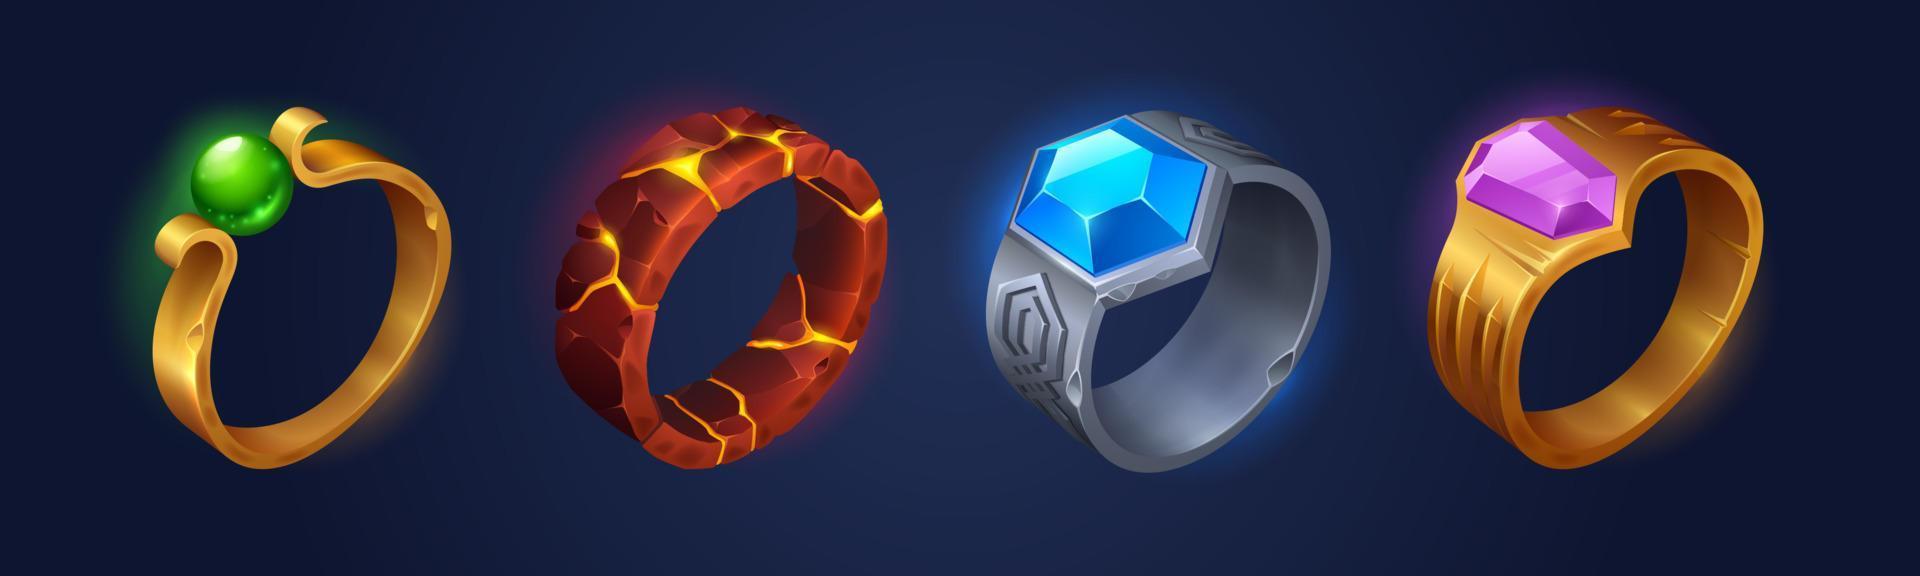 Fantasy magic rings with gems and fire inside vector